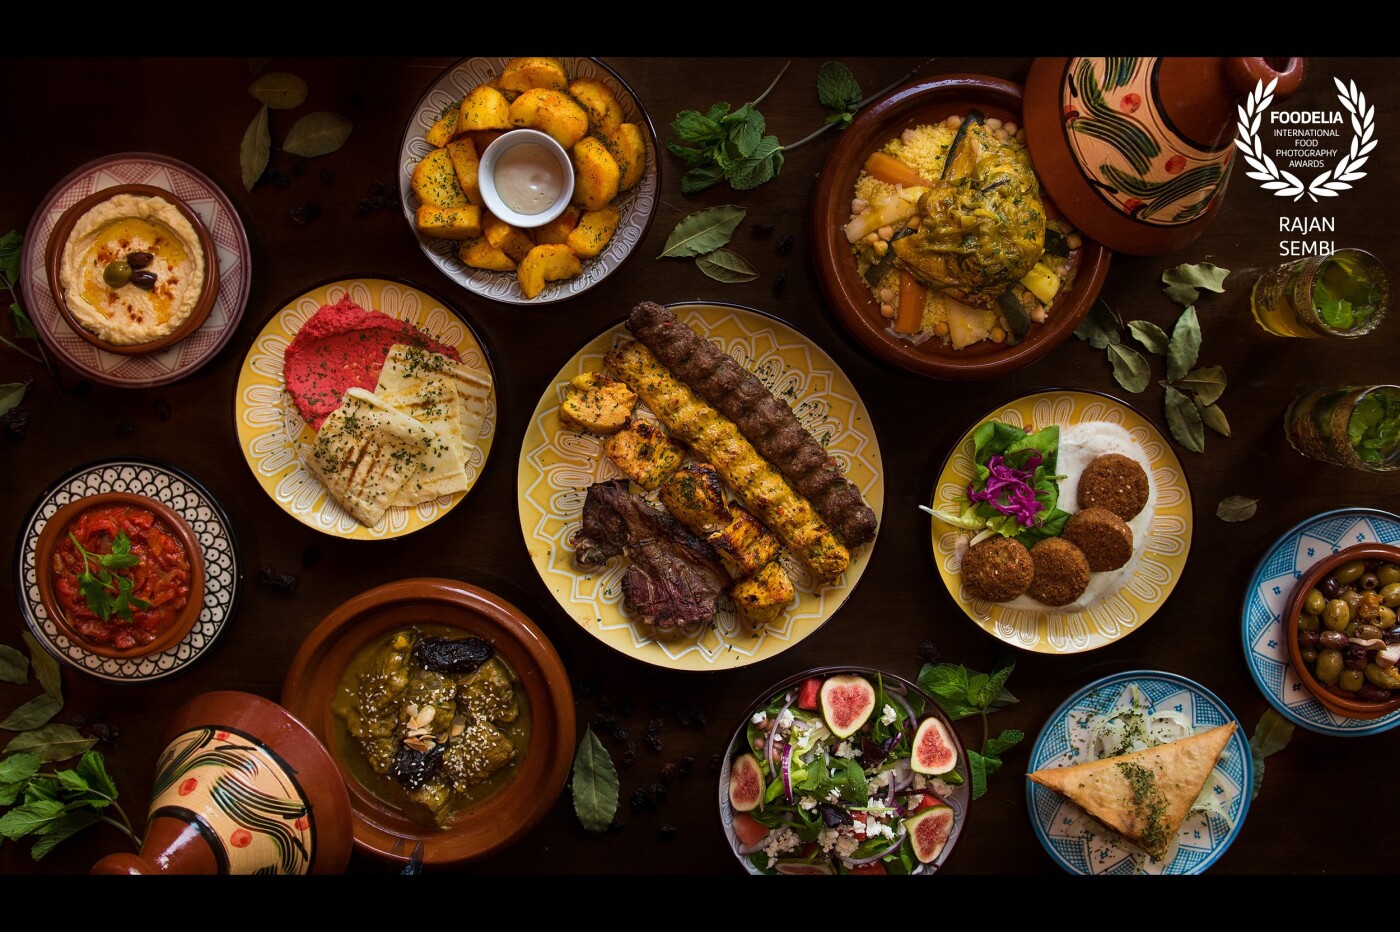 A Taste of Morocco. This photo includes a range of traditional Moroccan dishes including starters and mains. The dishes are surrounded by some key ingredients used in Moroccan cuisines such as dried fruits, bay leaves, and mint. <br />
<br />
I used a Nikon D750 with a 24-70mm lens.